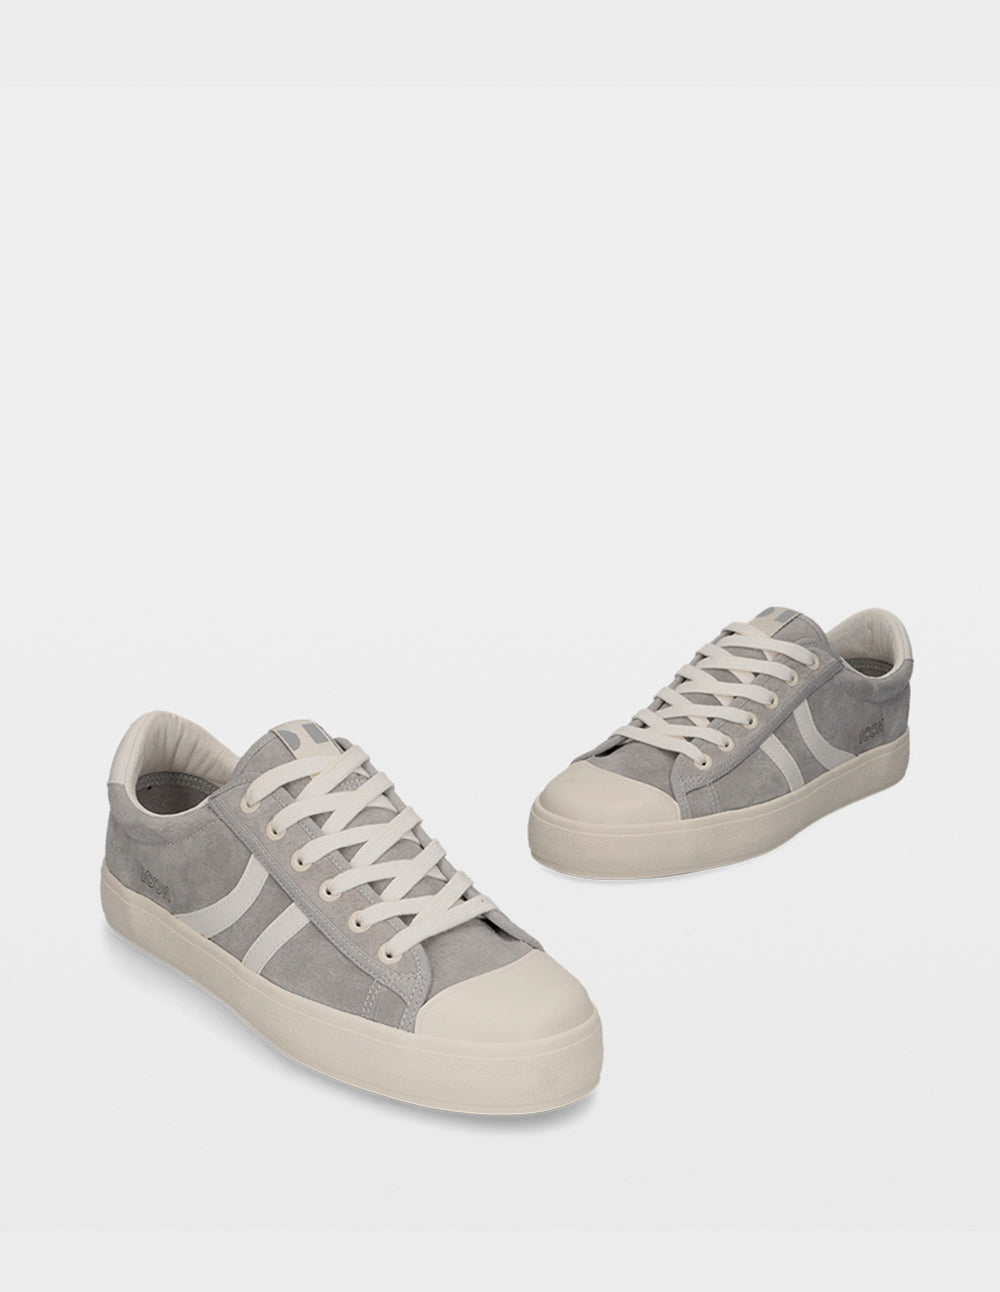 ICON-ONE GREY LEATHER HOMBRE